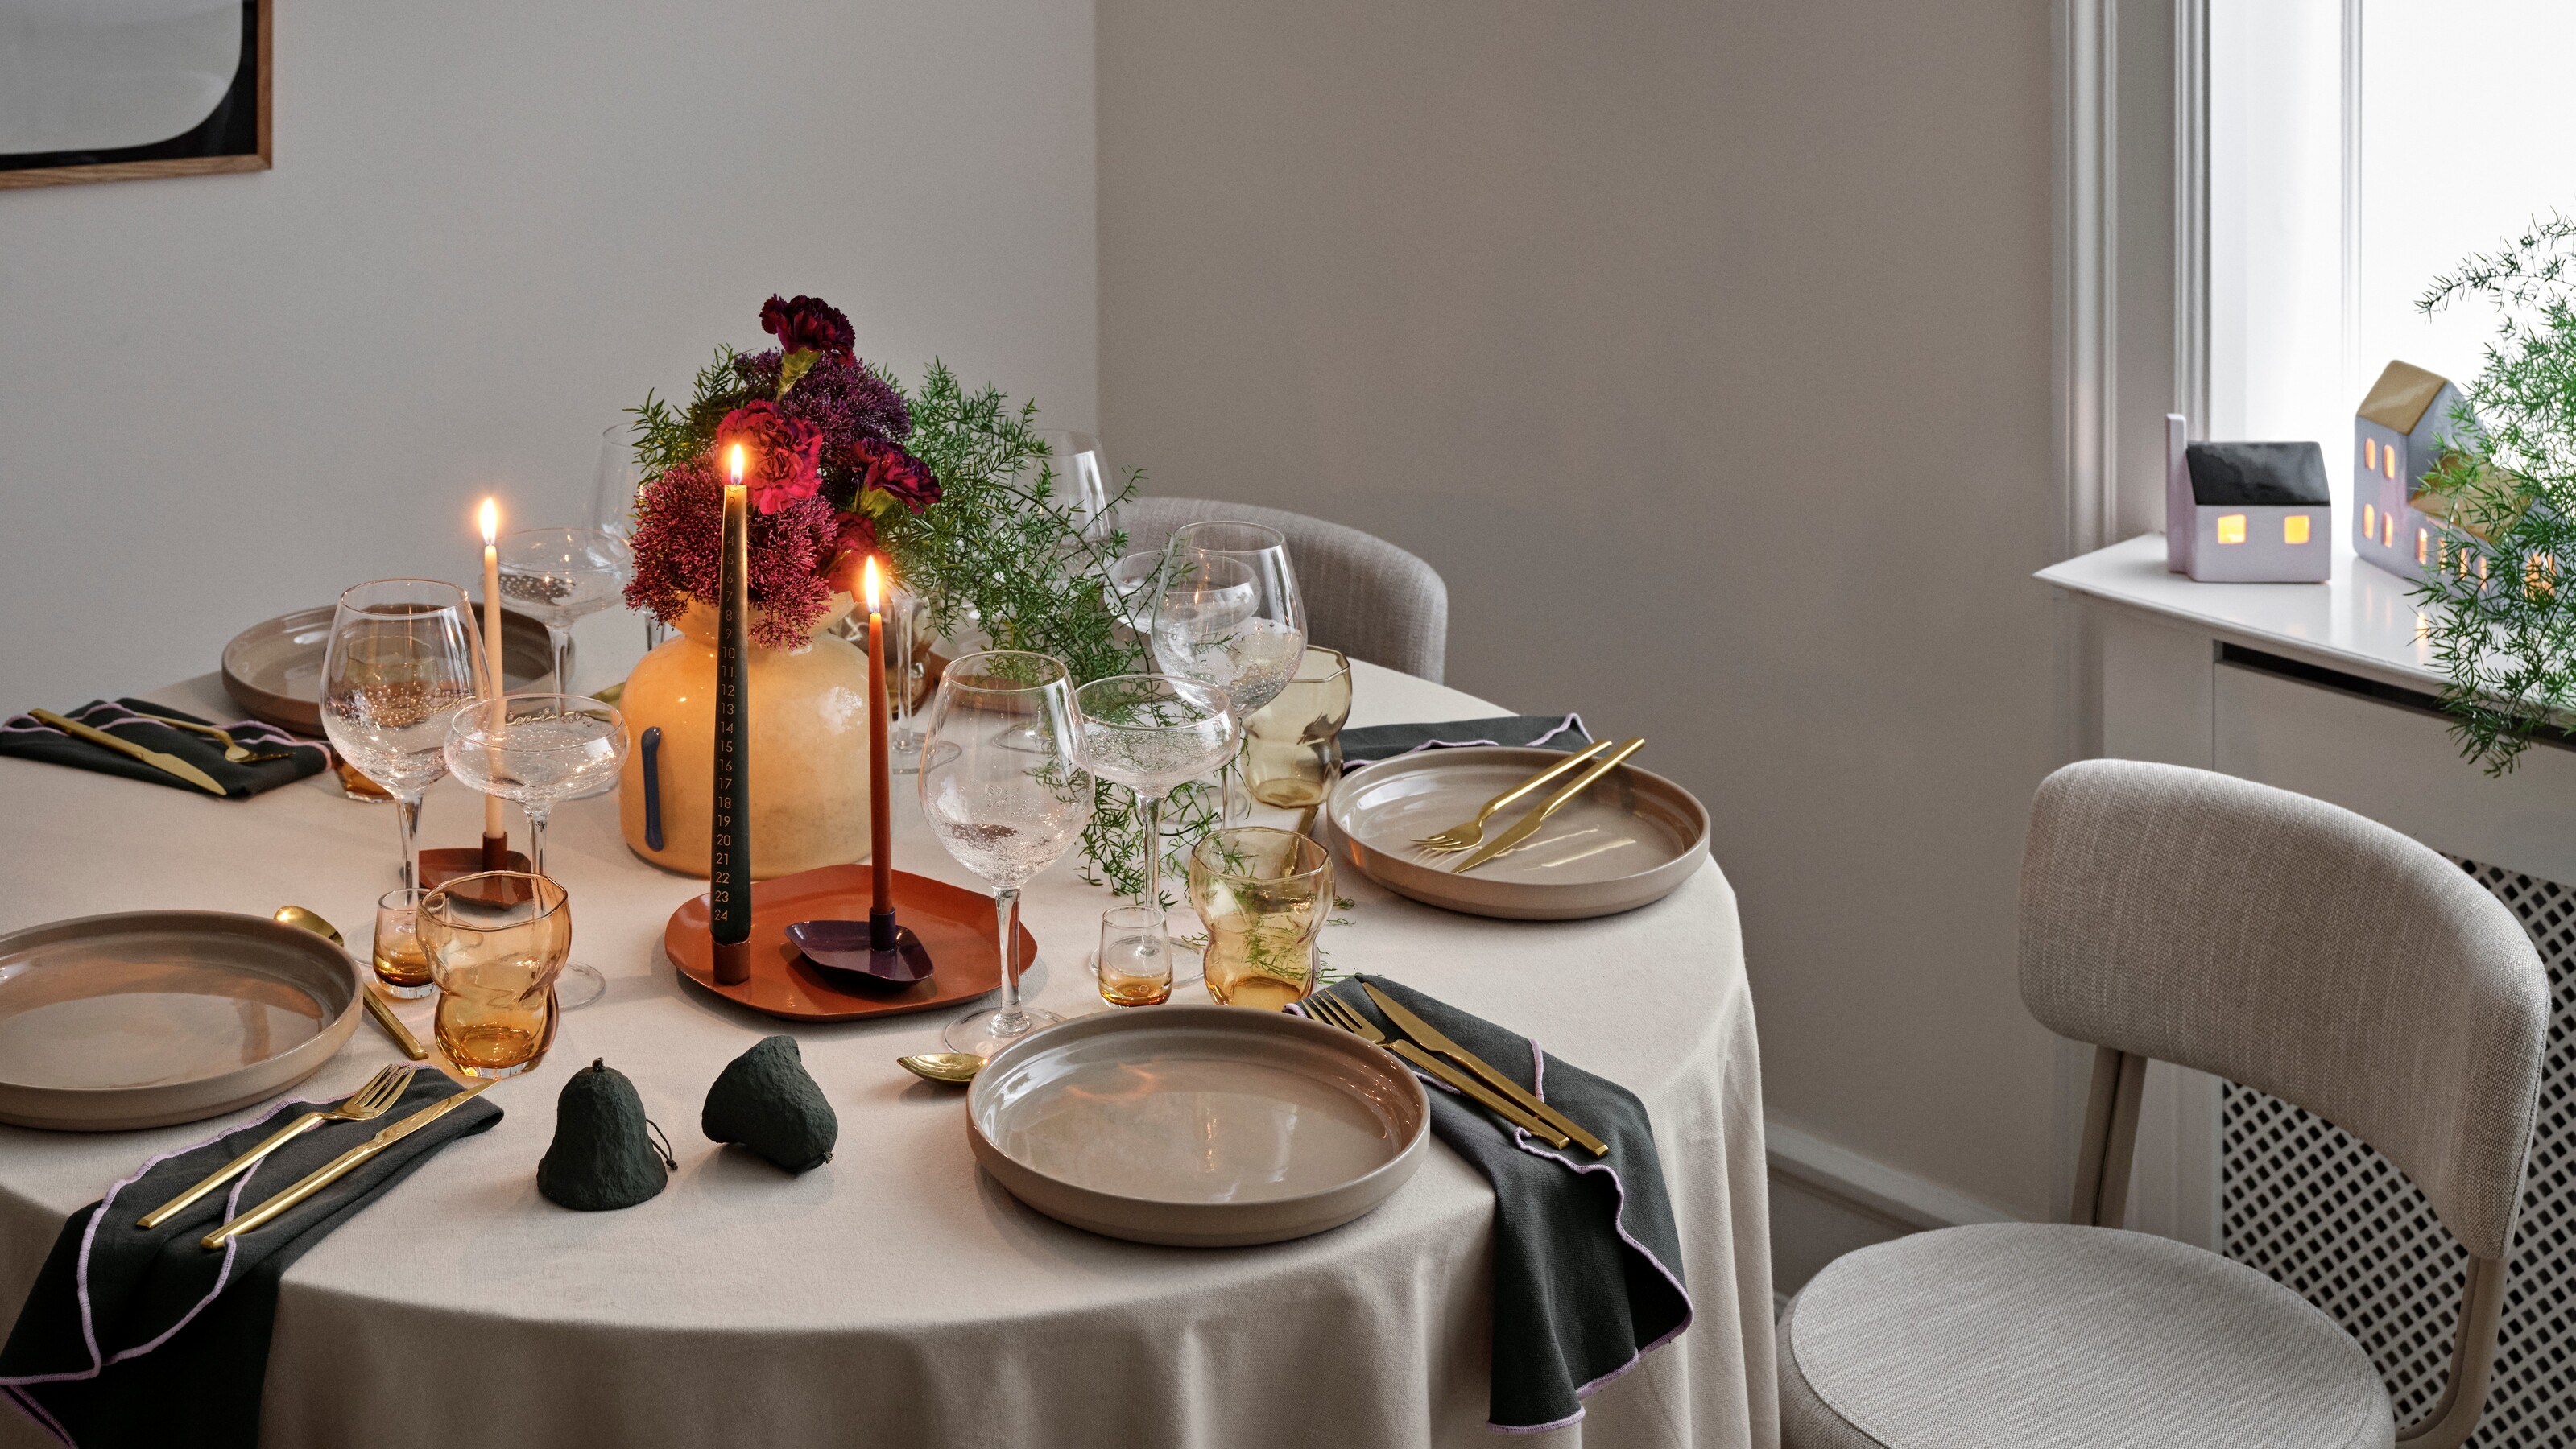 8 Table Centerpiece Ideas To Spruce Up Your Dining Room | Livingetc